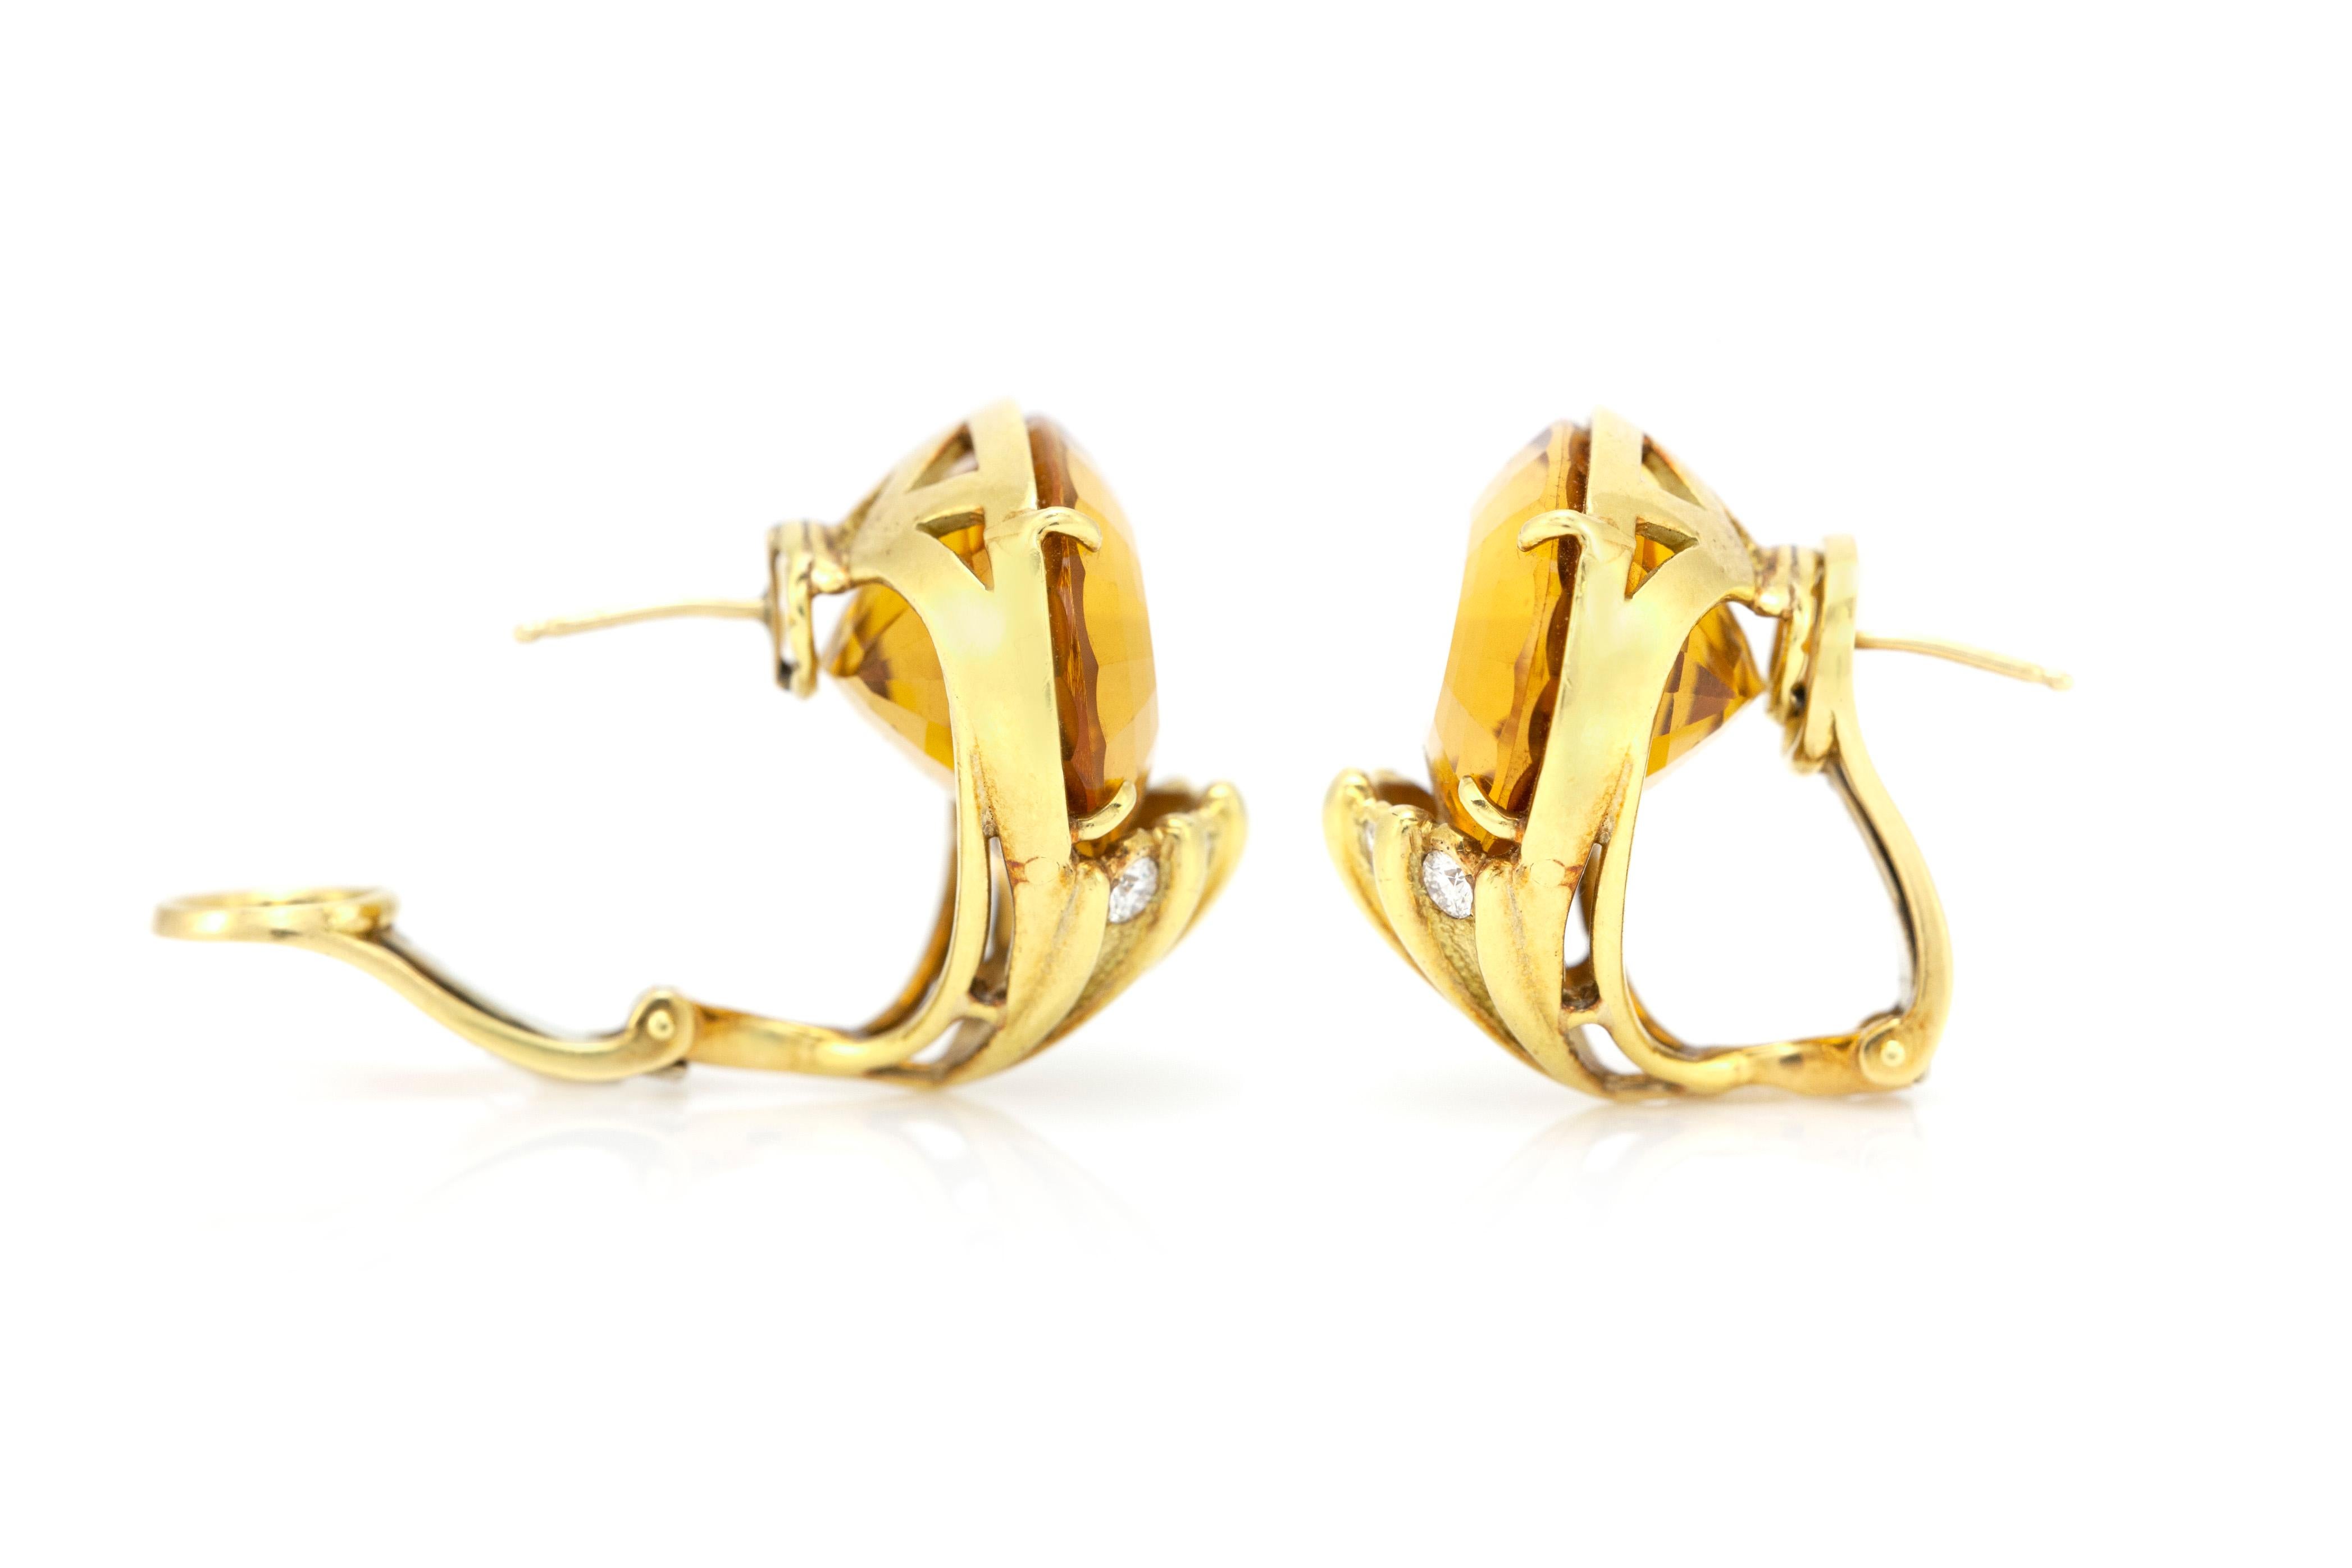 The earrings is finely crafted in 18k yellow gold with diamonds weighing approximately total of 0.50 and citrine as a center stone and weighing approximately total of 30.00 carat.